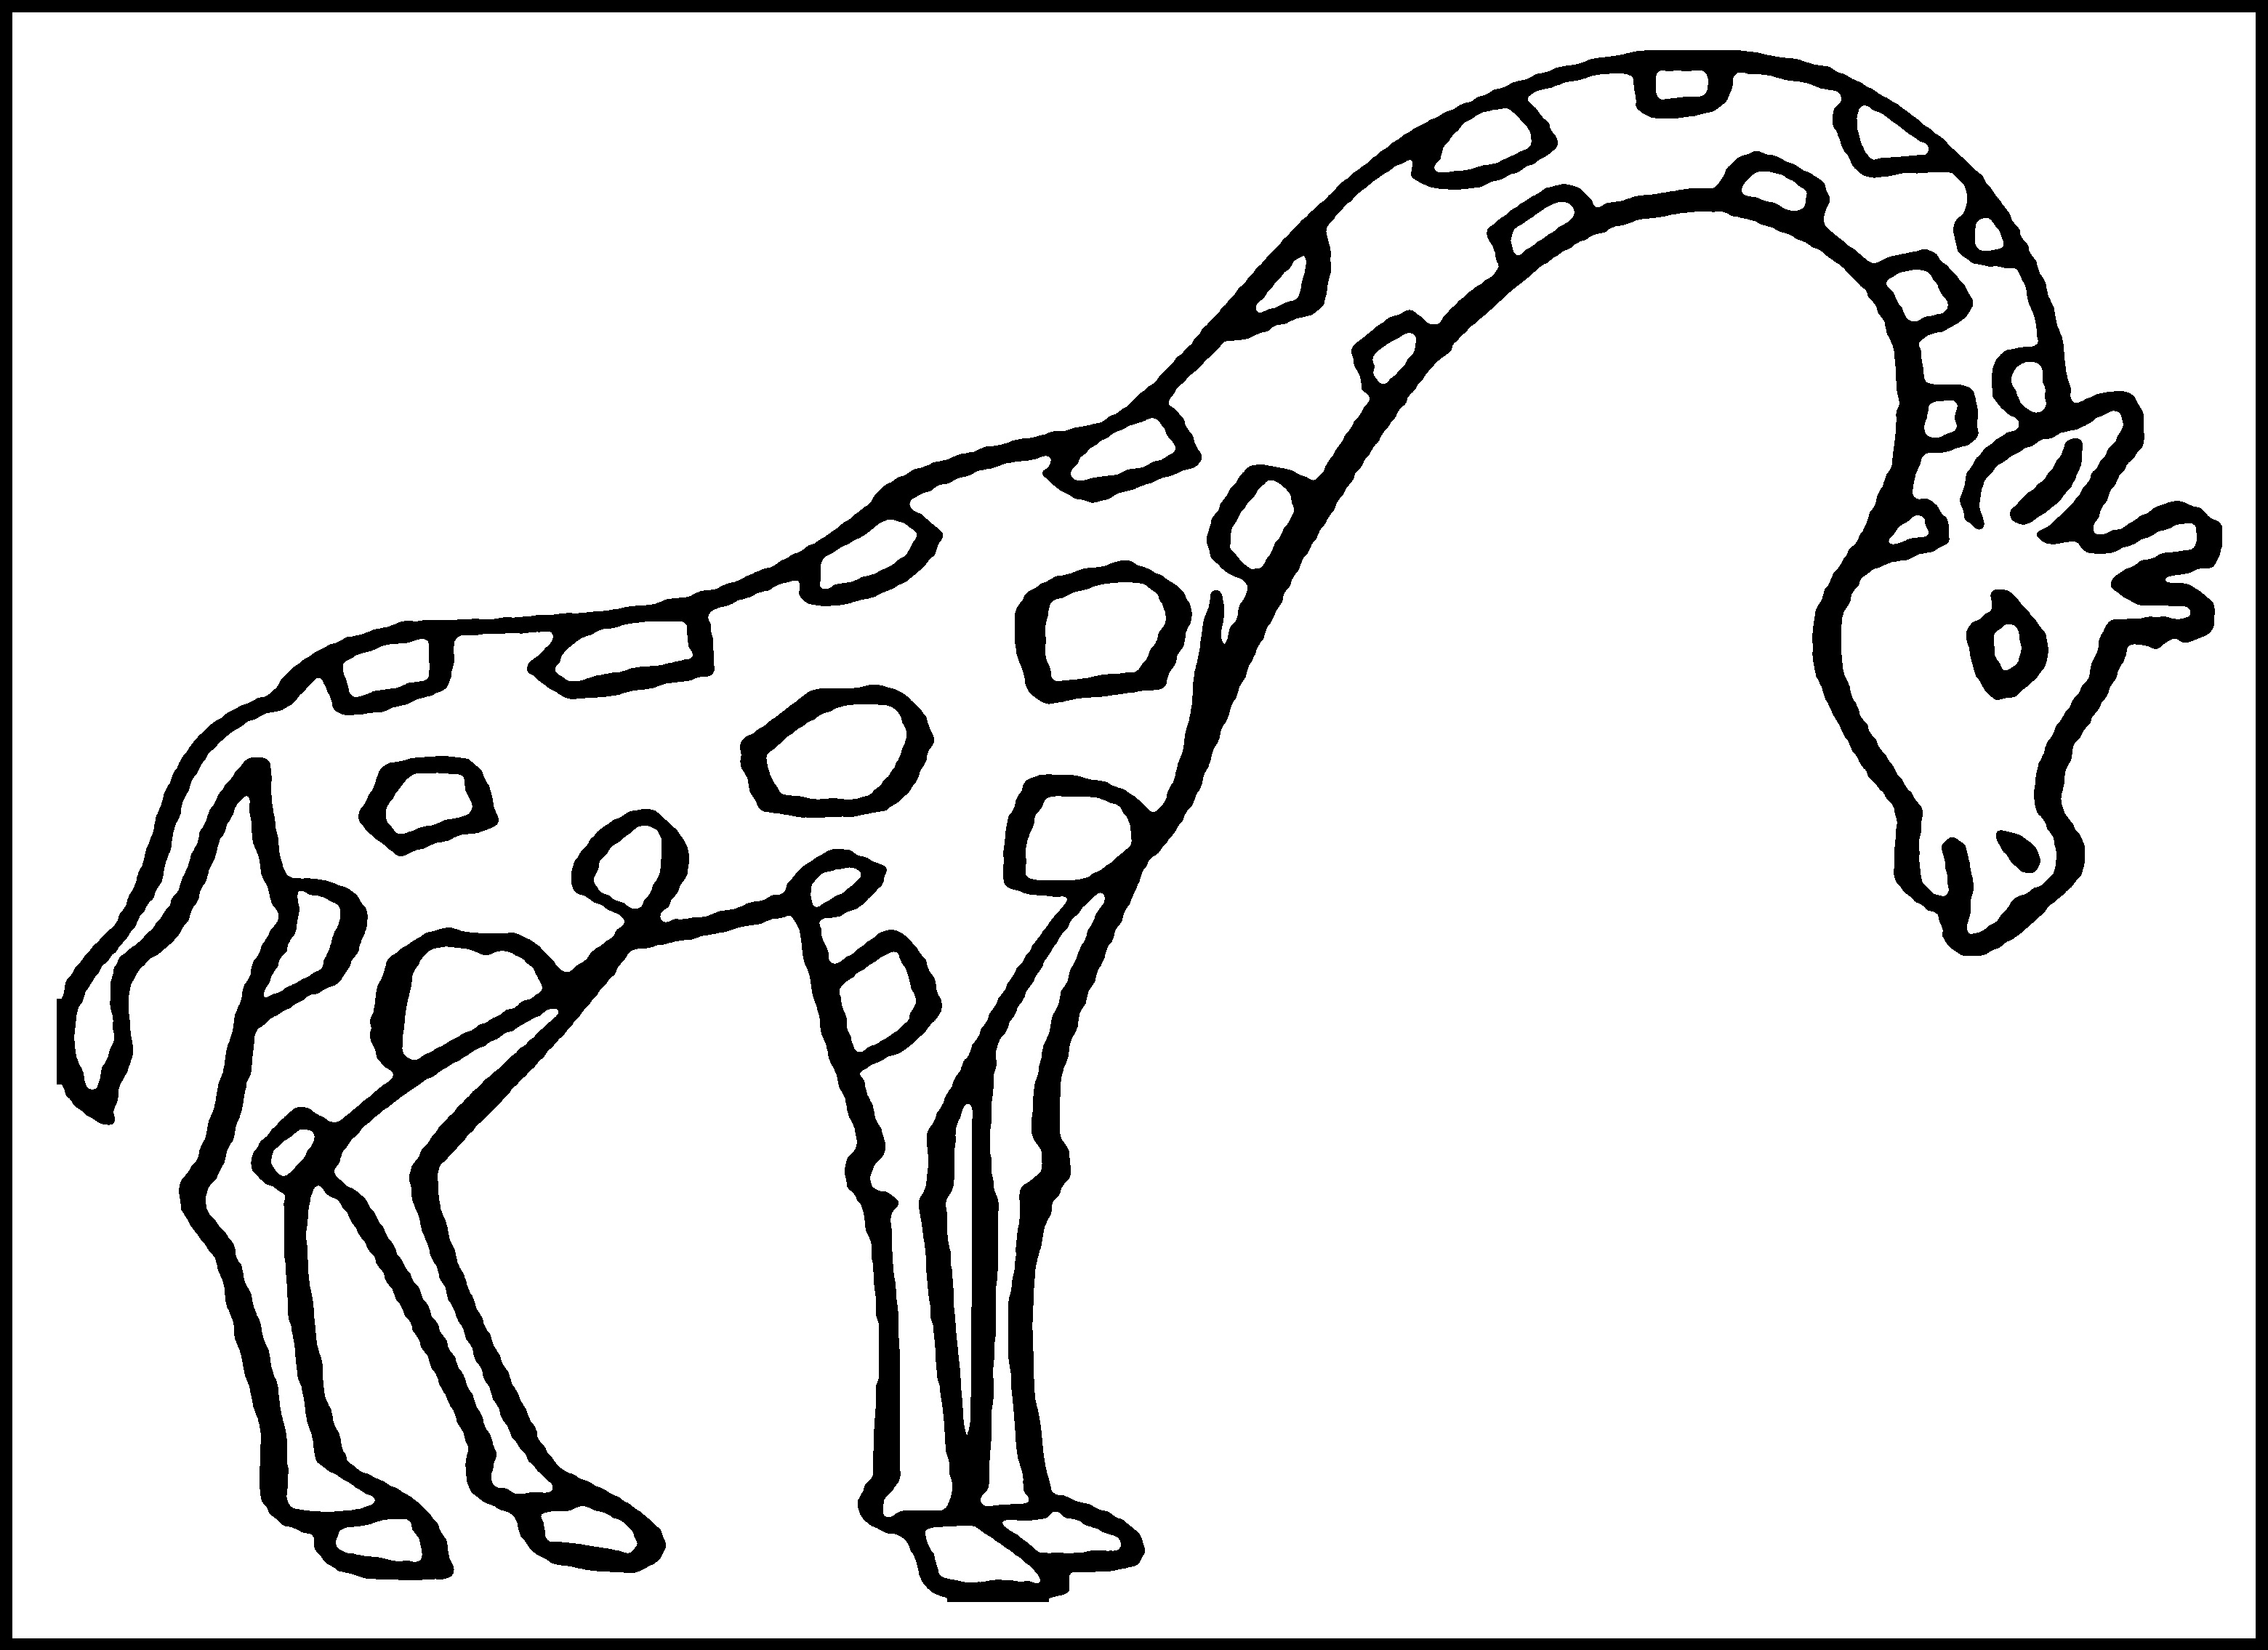 Giraffe for Kids Photo Coloring Page